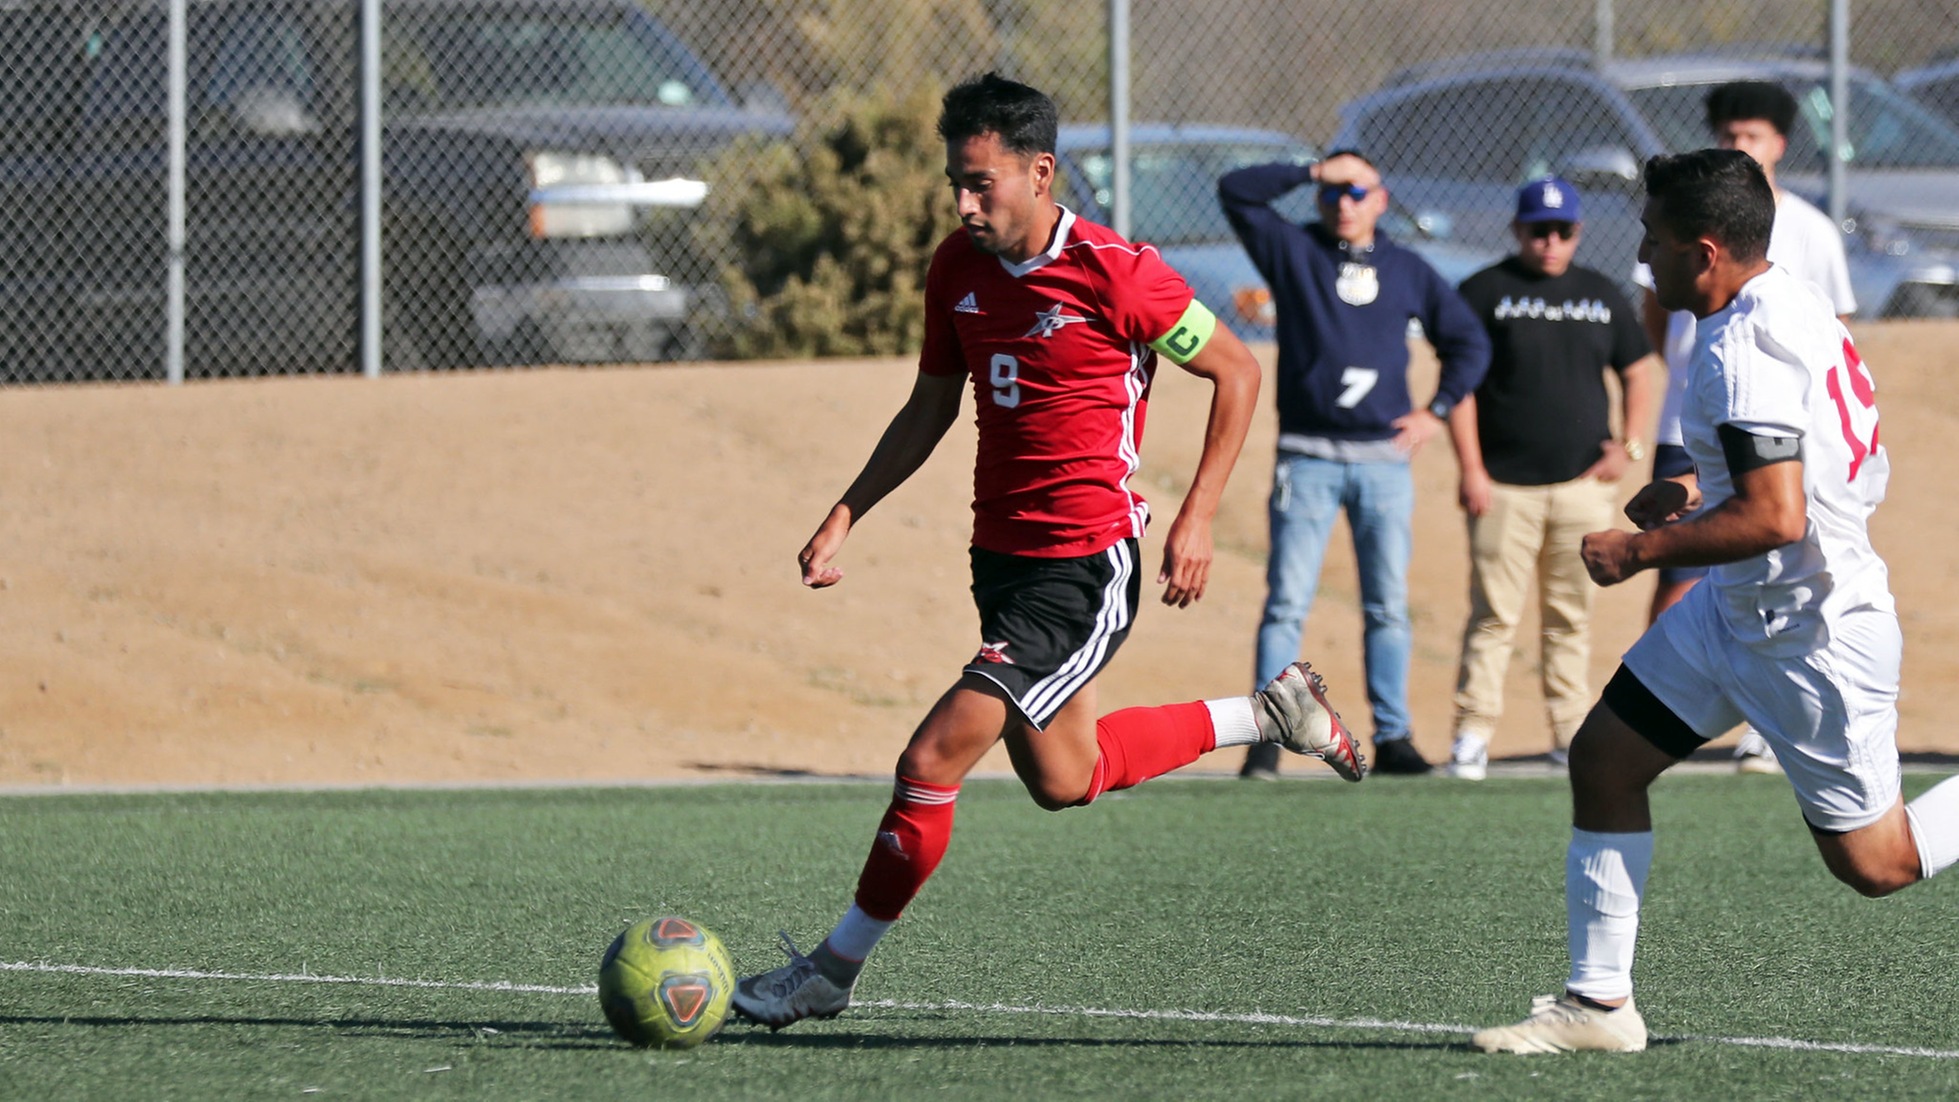 Arturo Soltero scored the two goals for the Comets in their final game. Photo by Hugh Cox (taken 11/1).